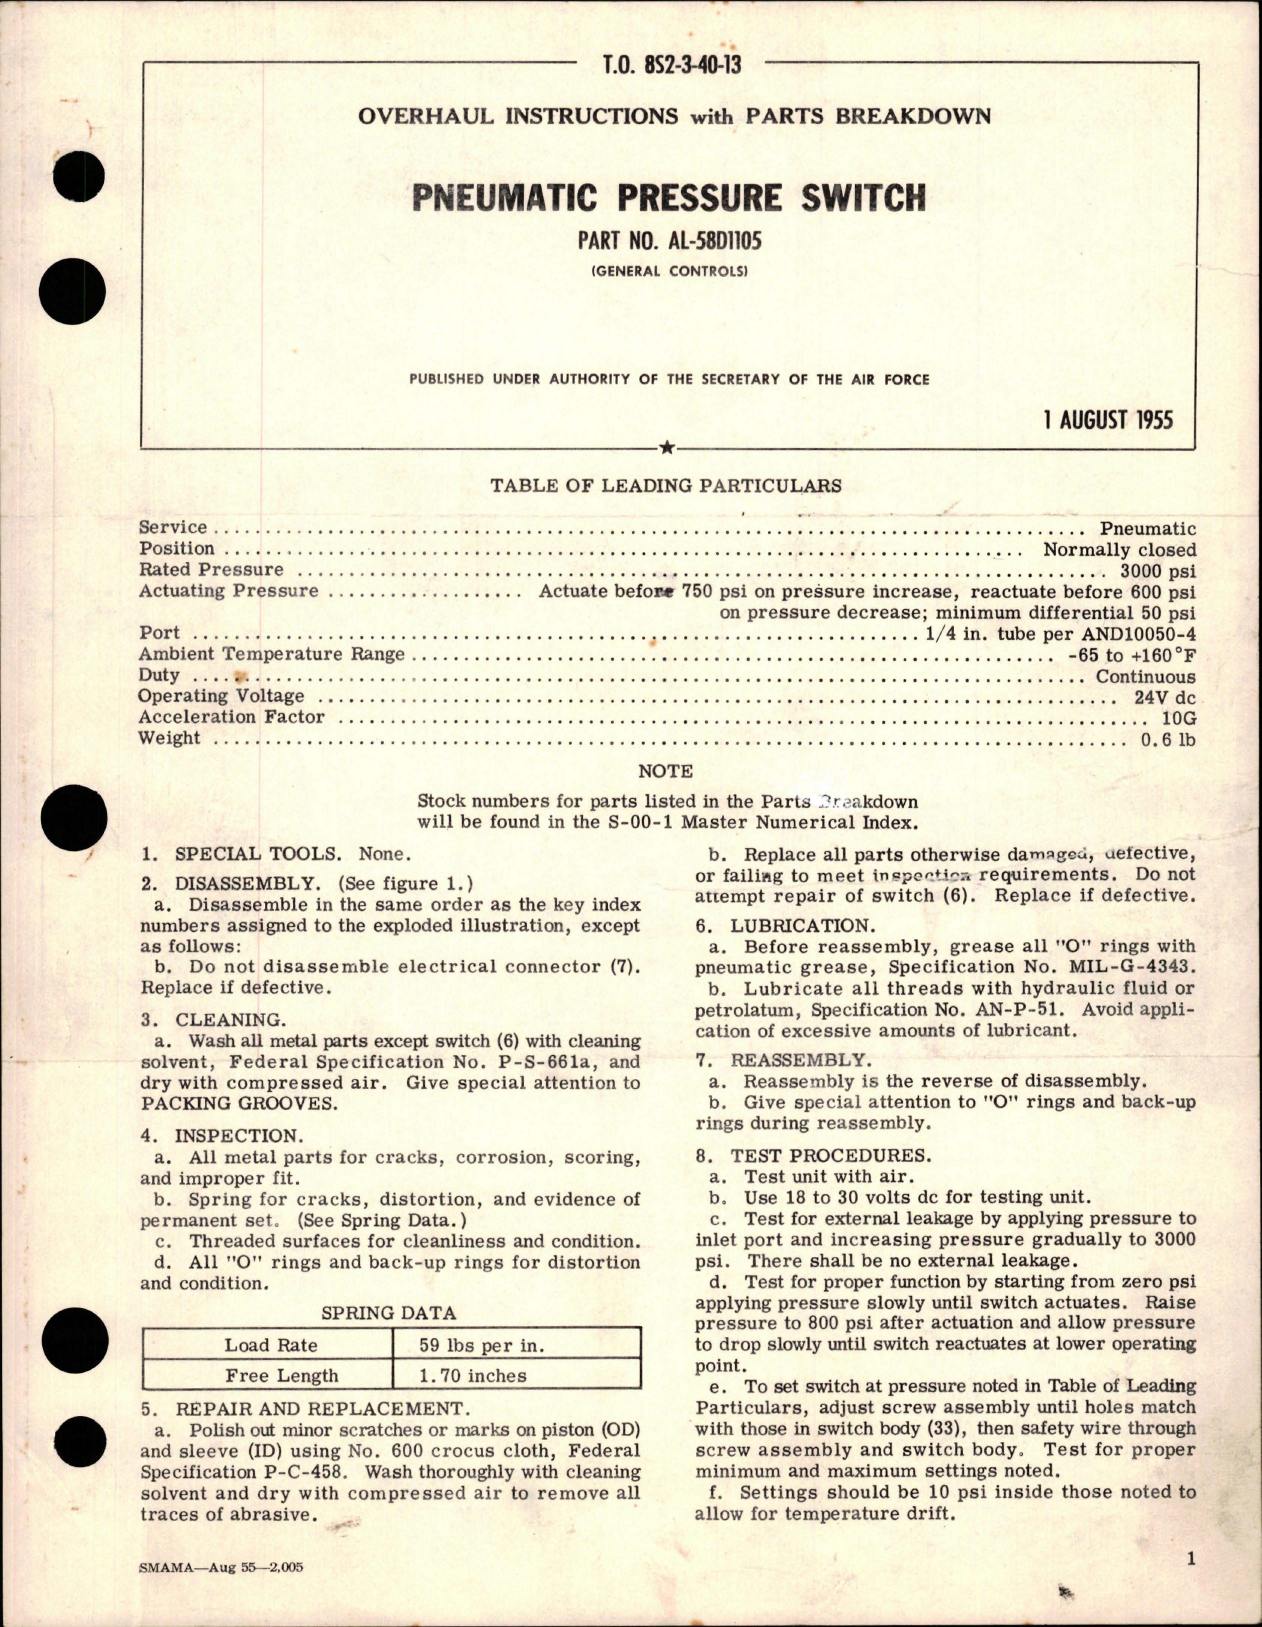 Sample page 1 from AirCorps Library document: Overhaul Instructions with Parts for Pneumatic Pressure Switch - Part AL-58D1105